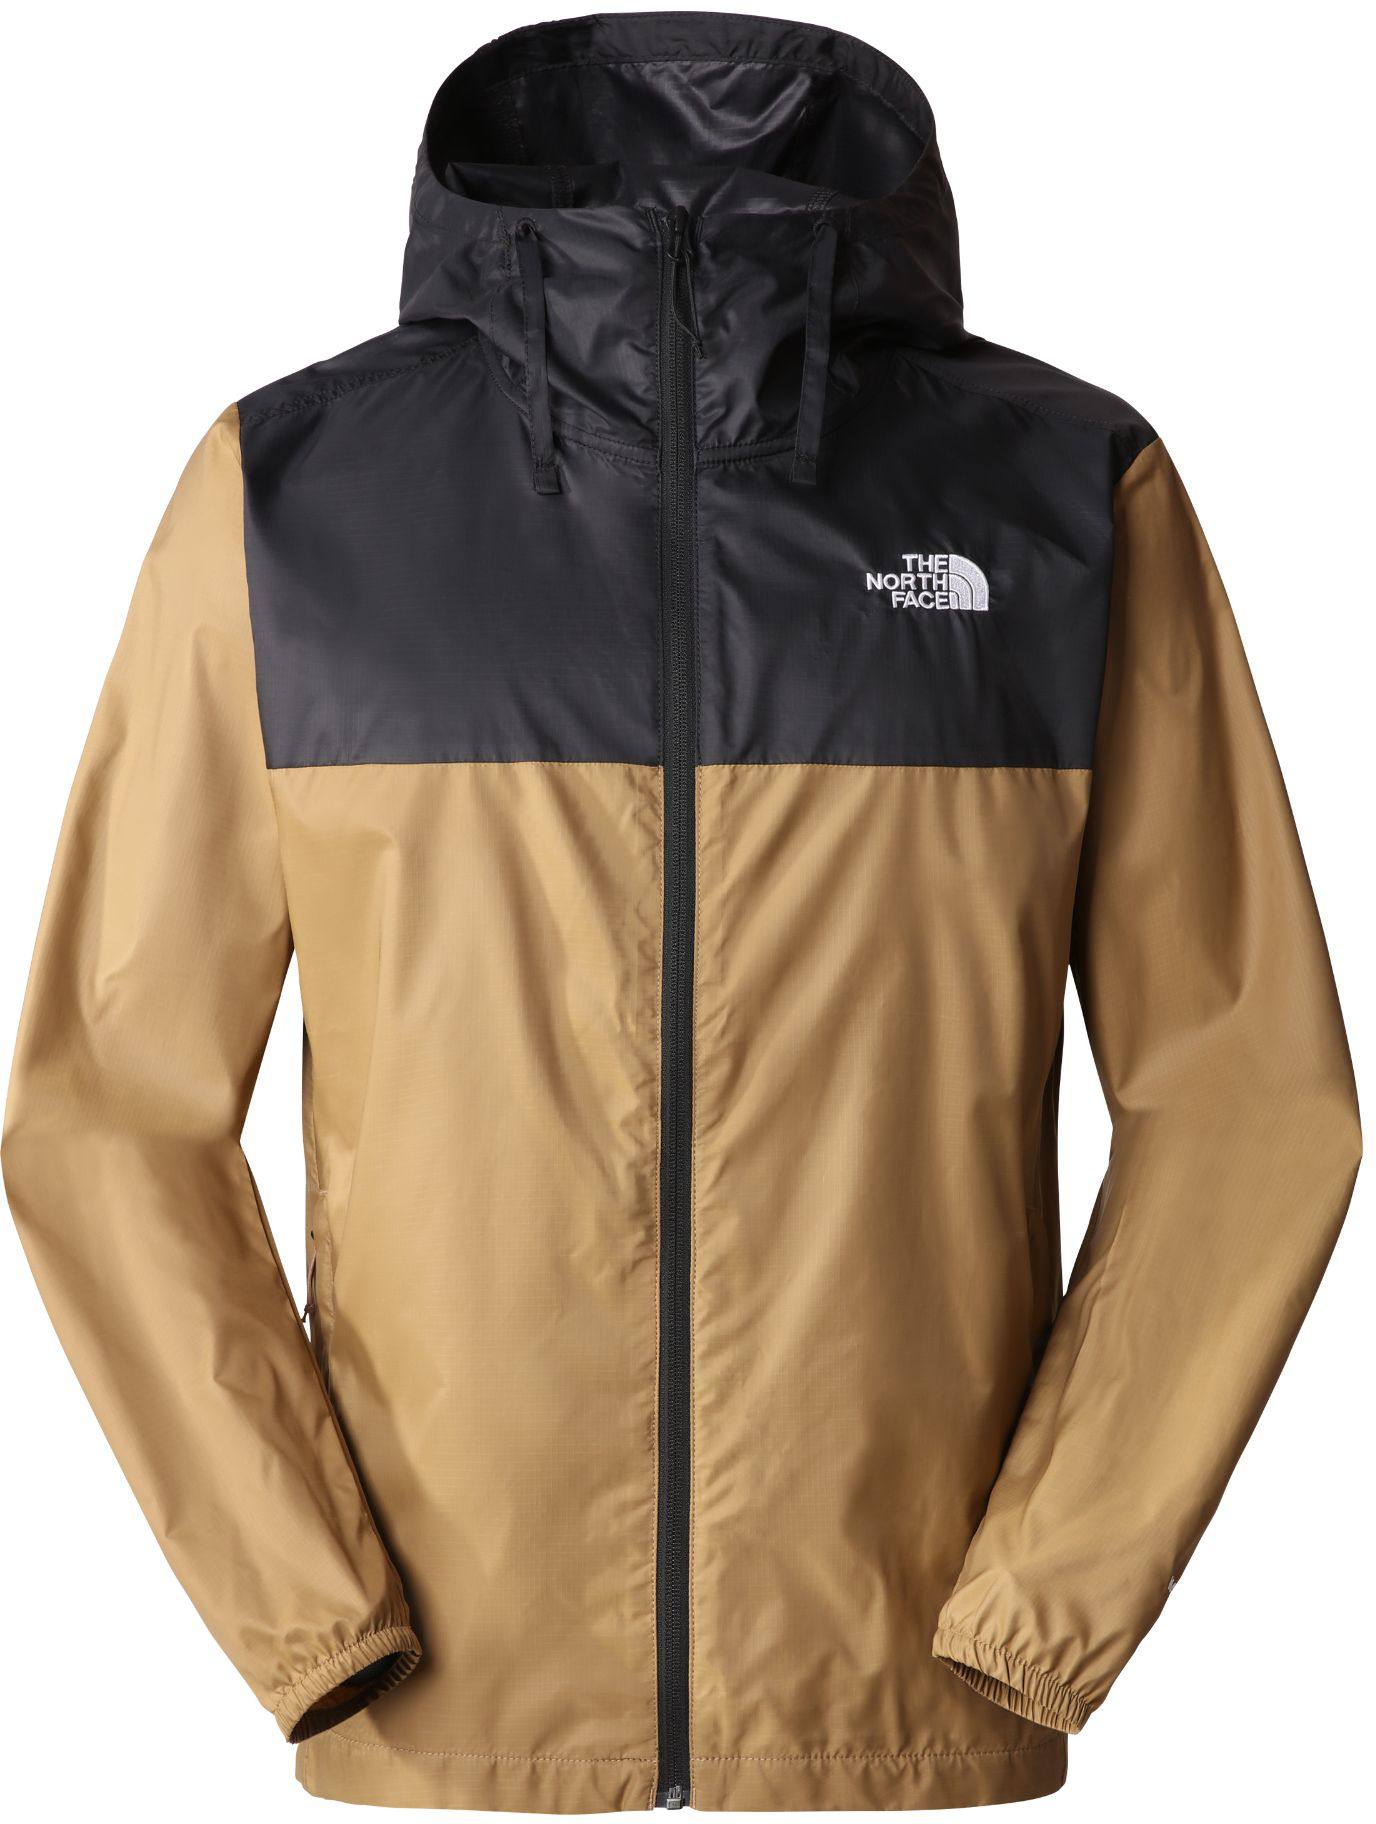 Image of The North Face Men's Cyclone 3 Jacket